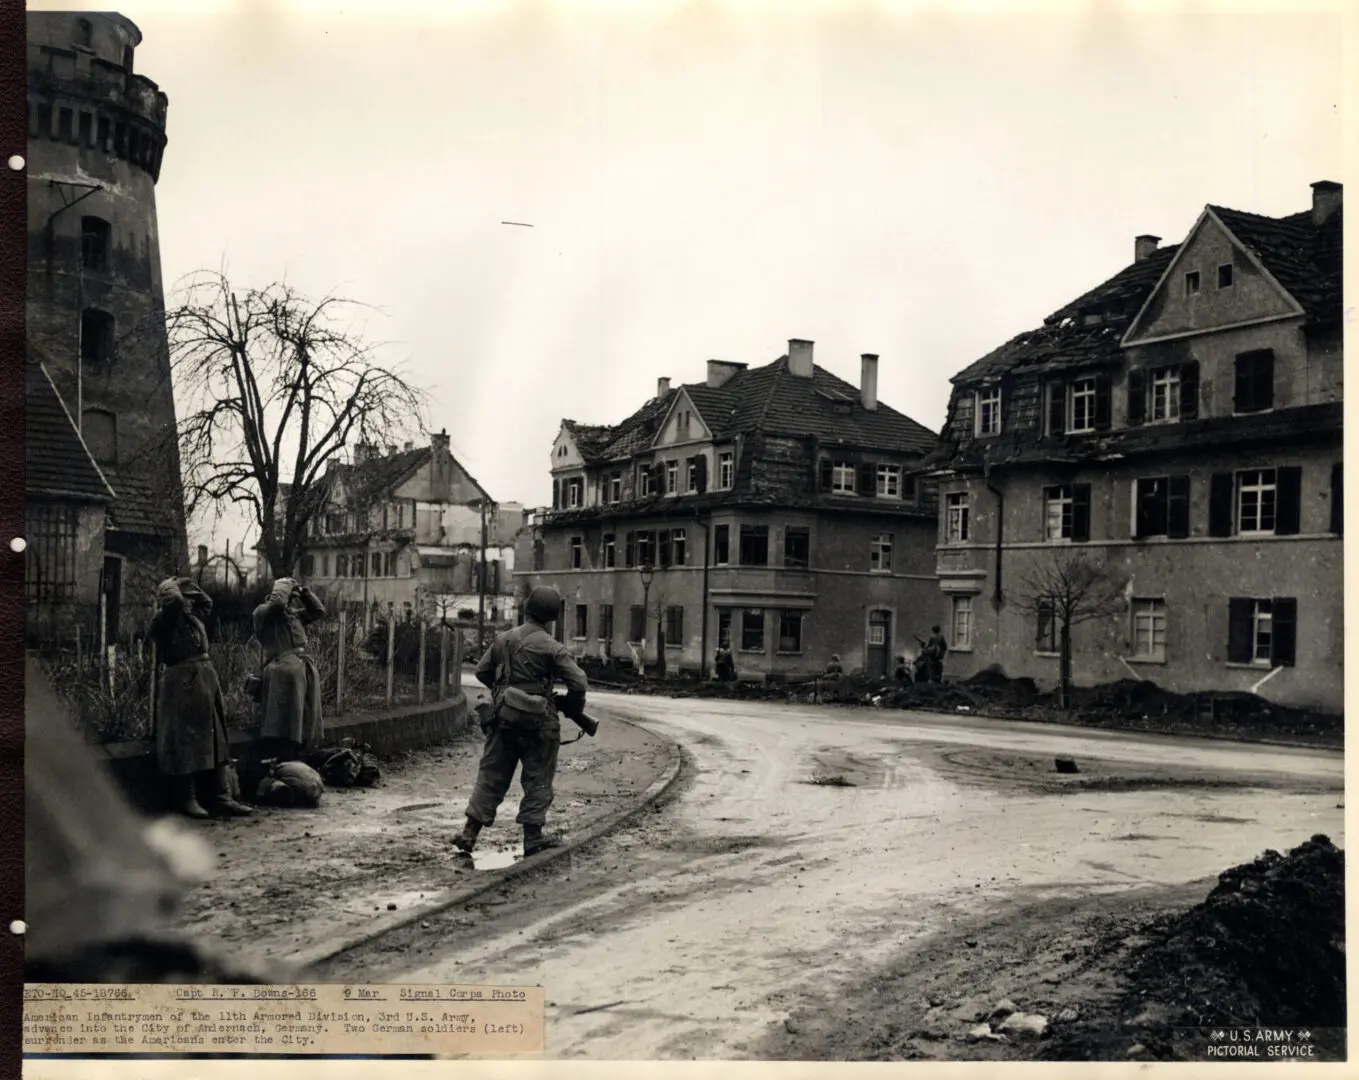 American infantryman patrolling the streets of Anderach